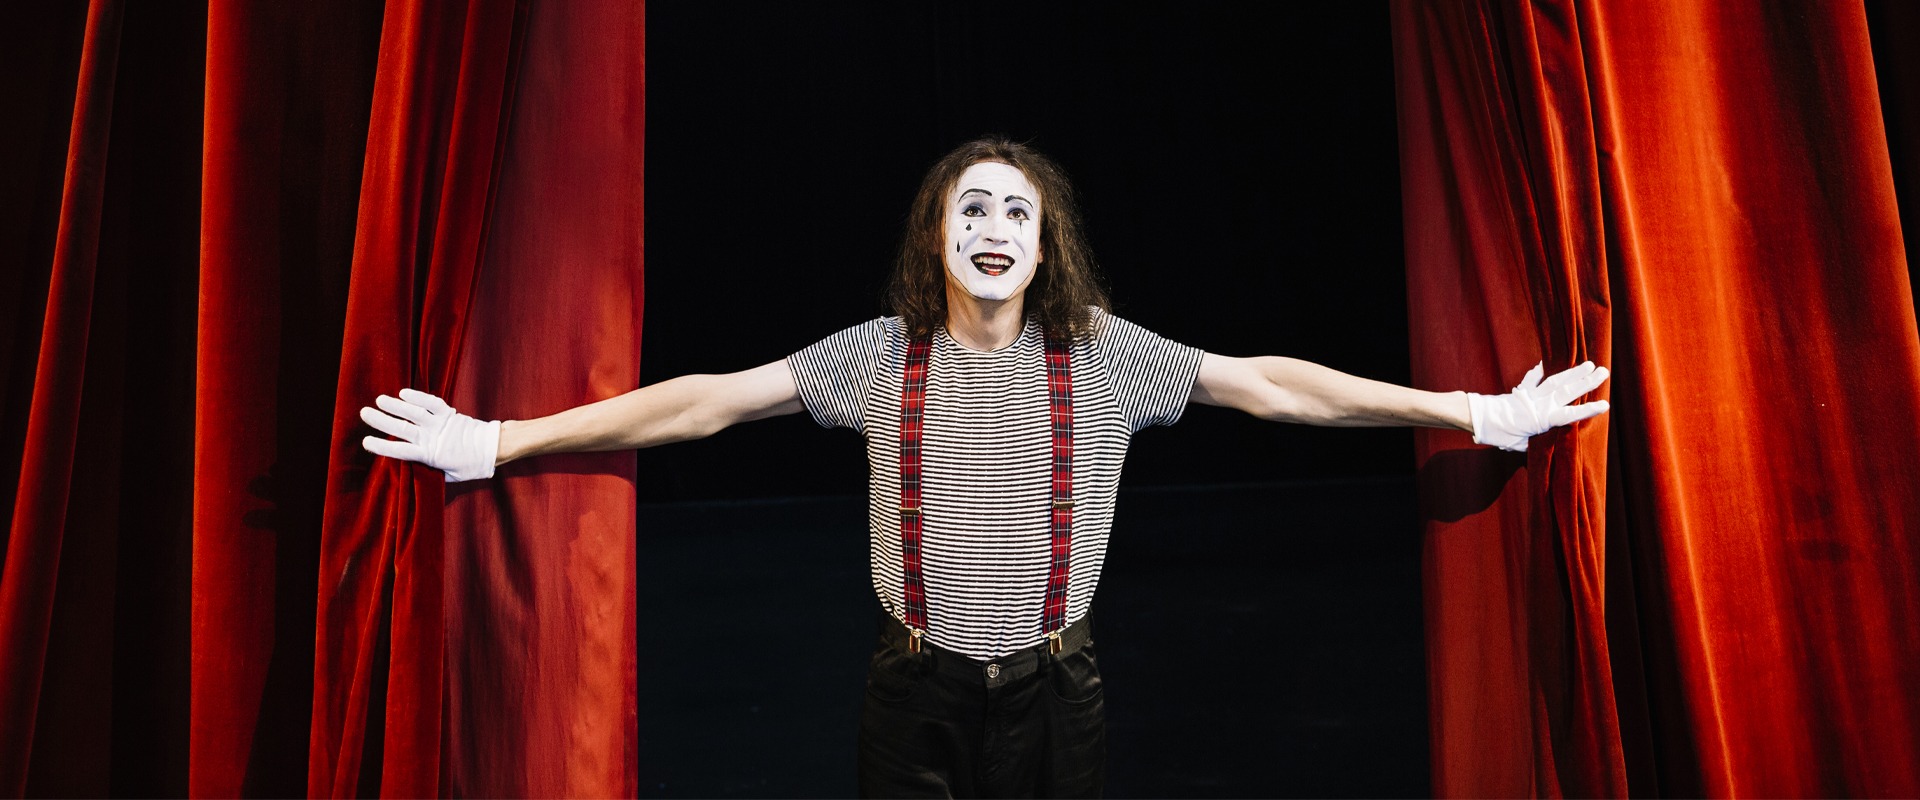 Actor masked as Pierrot open the red curtains and enters the stage